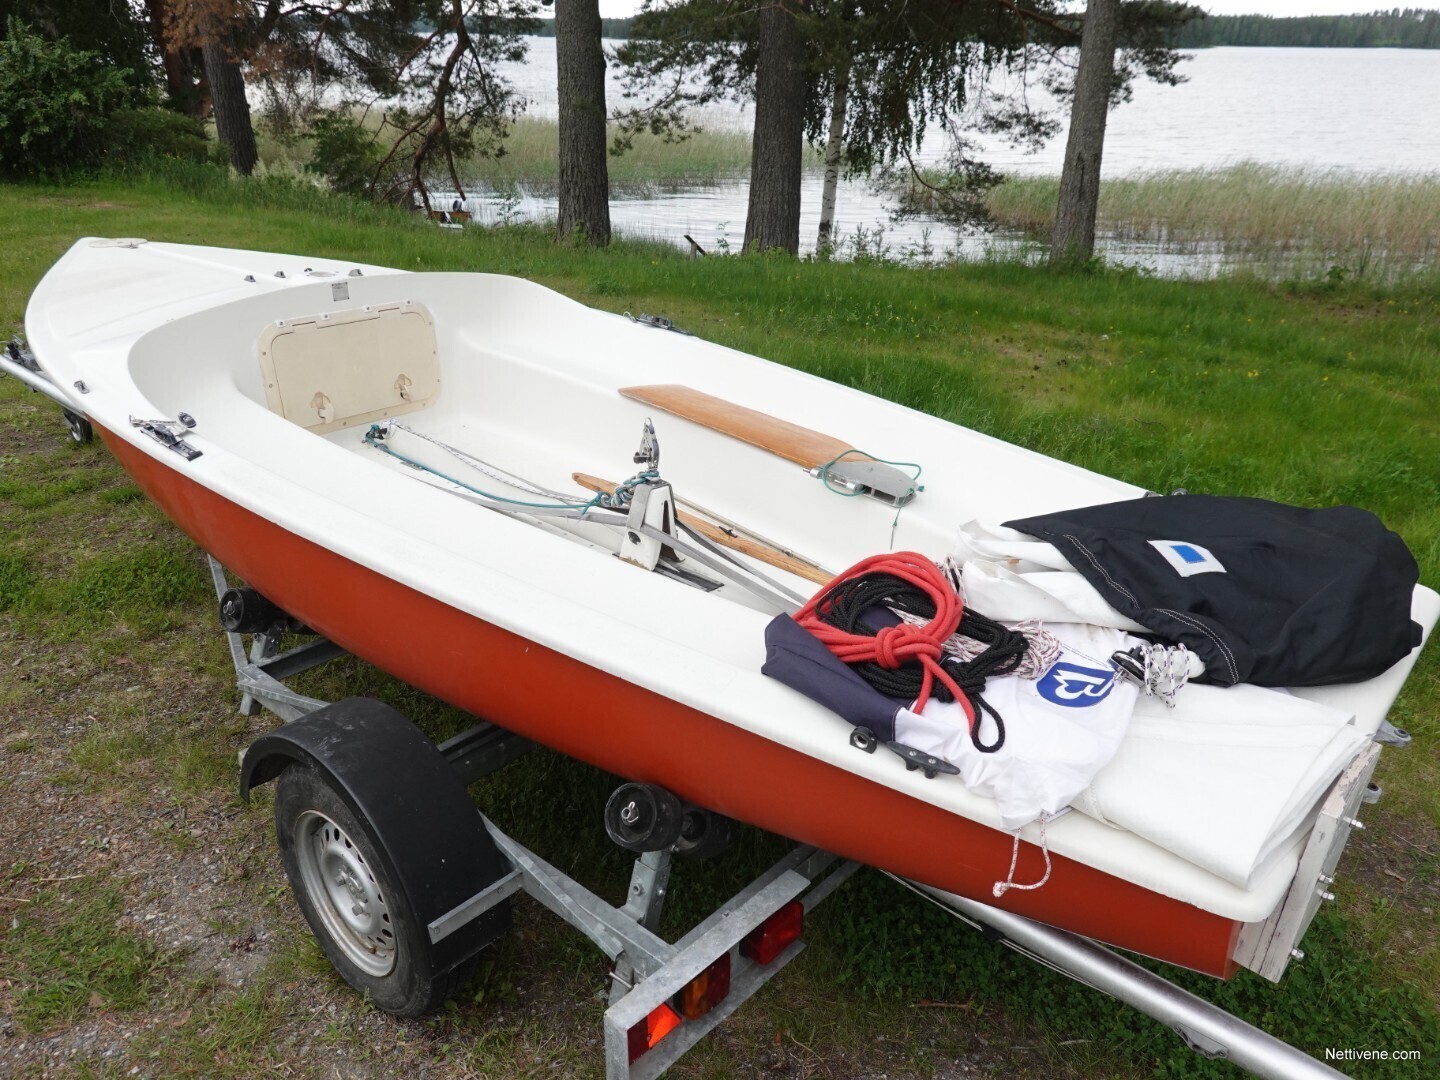 bombardier 4.8 sailboat review